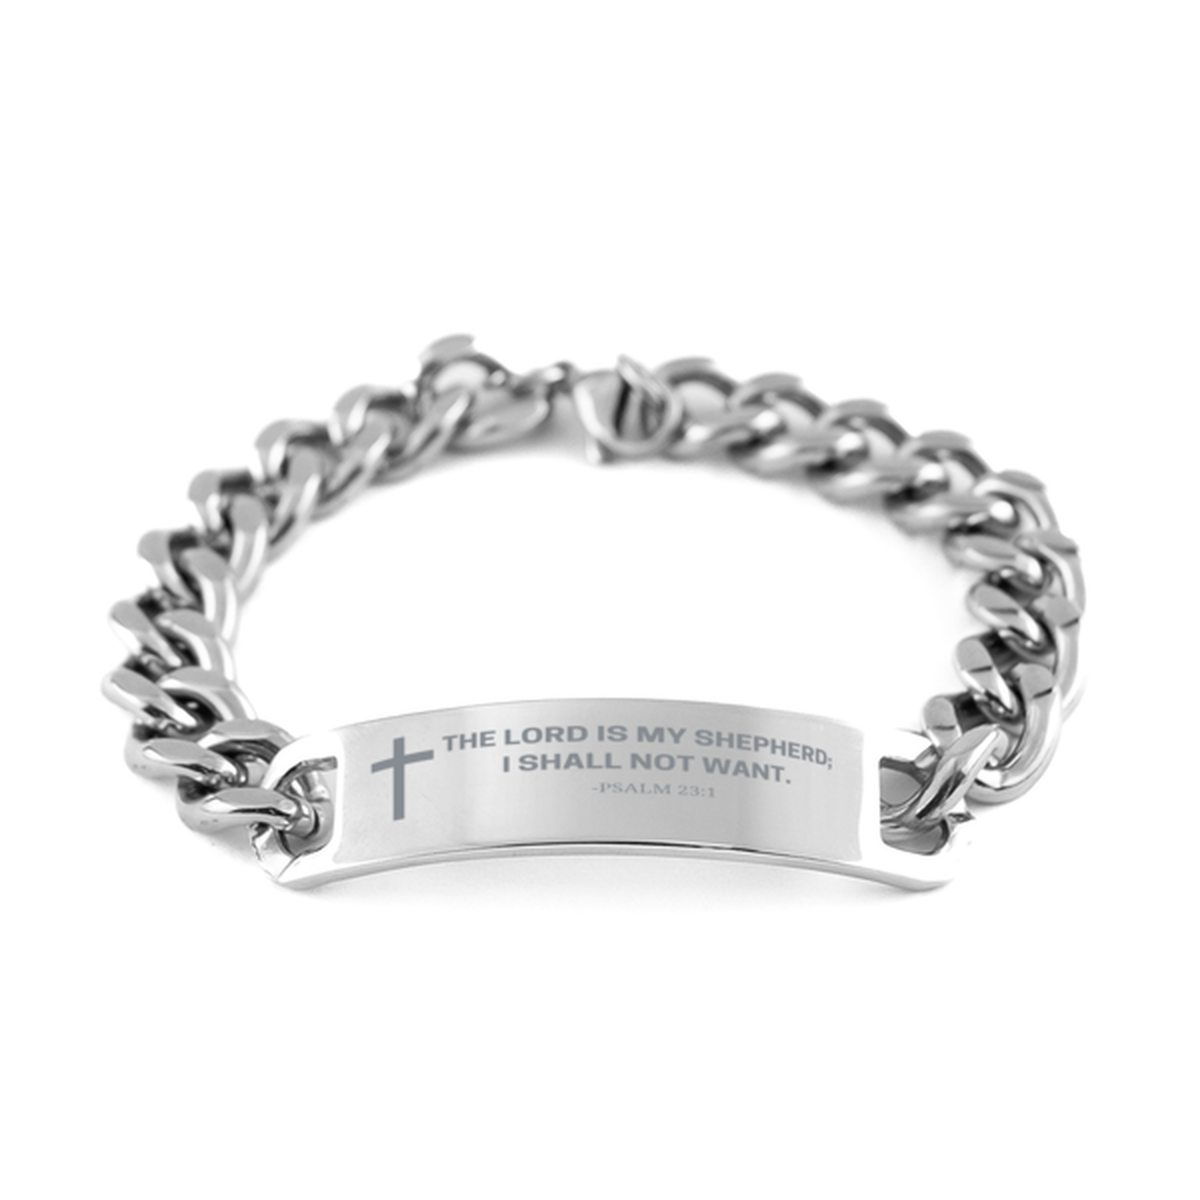 Baptism Gifts For Teenage Boys Girls, Christian Bible Verse Cuban Chain Bracelet, The Lord is my shepherd, Catholic Confirmation Gifts for Son, Godson, Grandson, Nephew